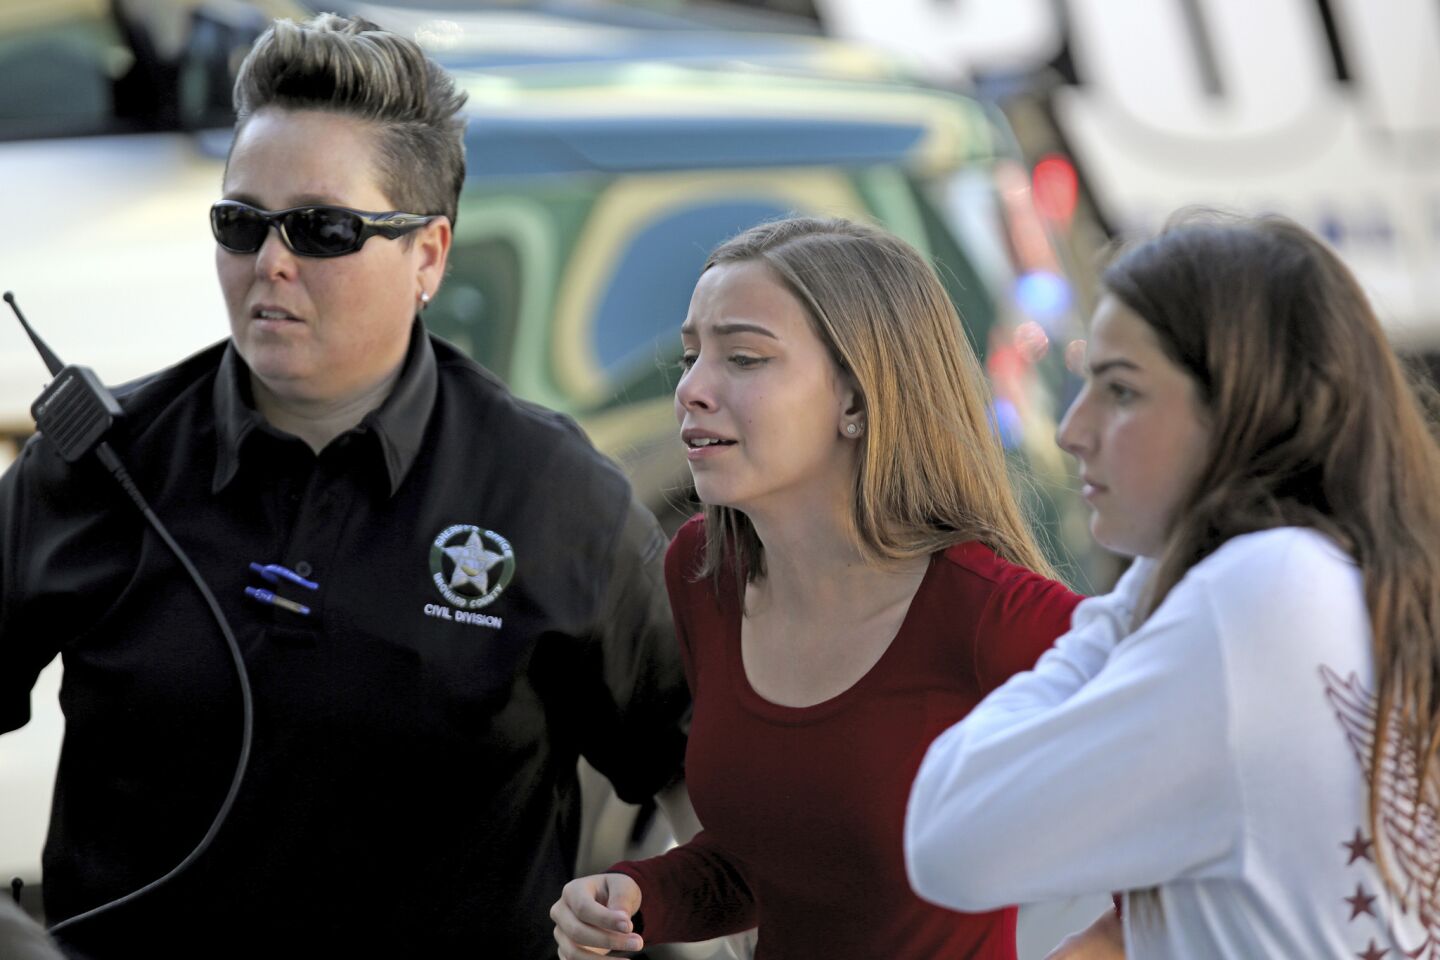 Students are escorted by police following a shooting at Marjory Stoneman Douglas High School in Parkland, Fla.